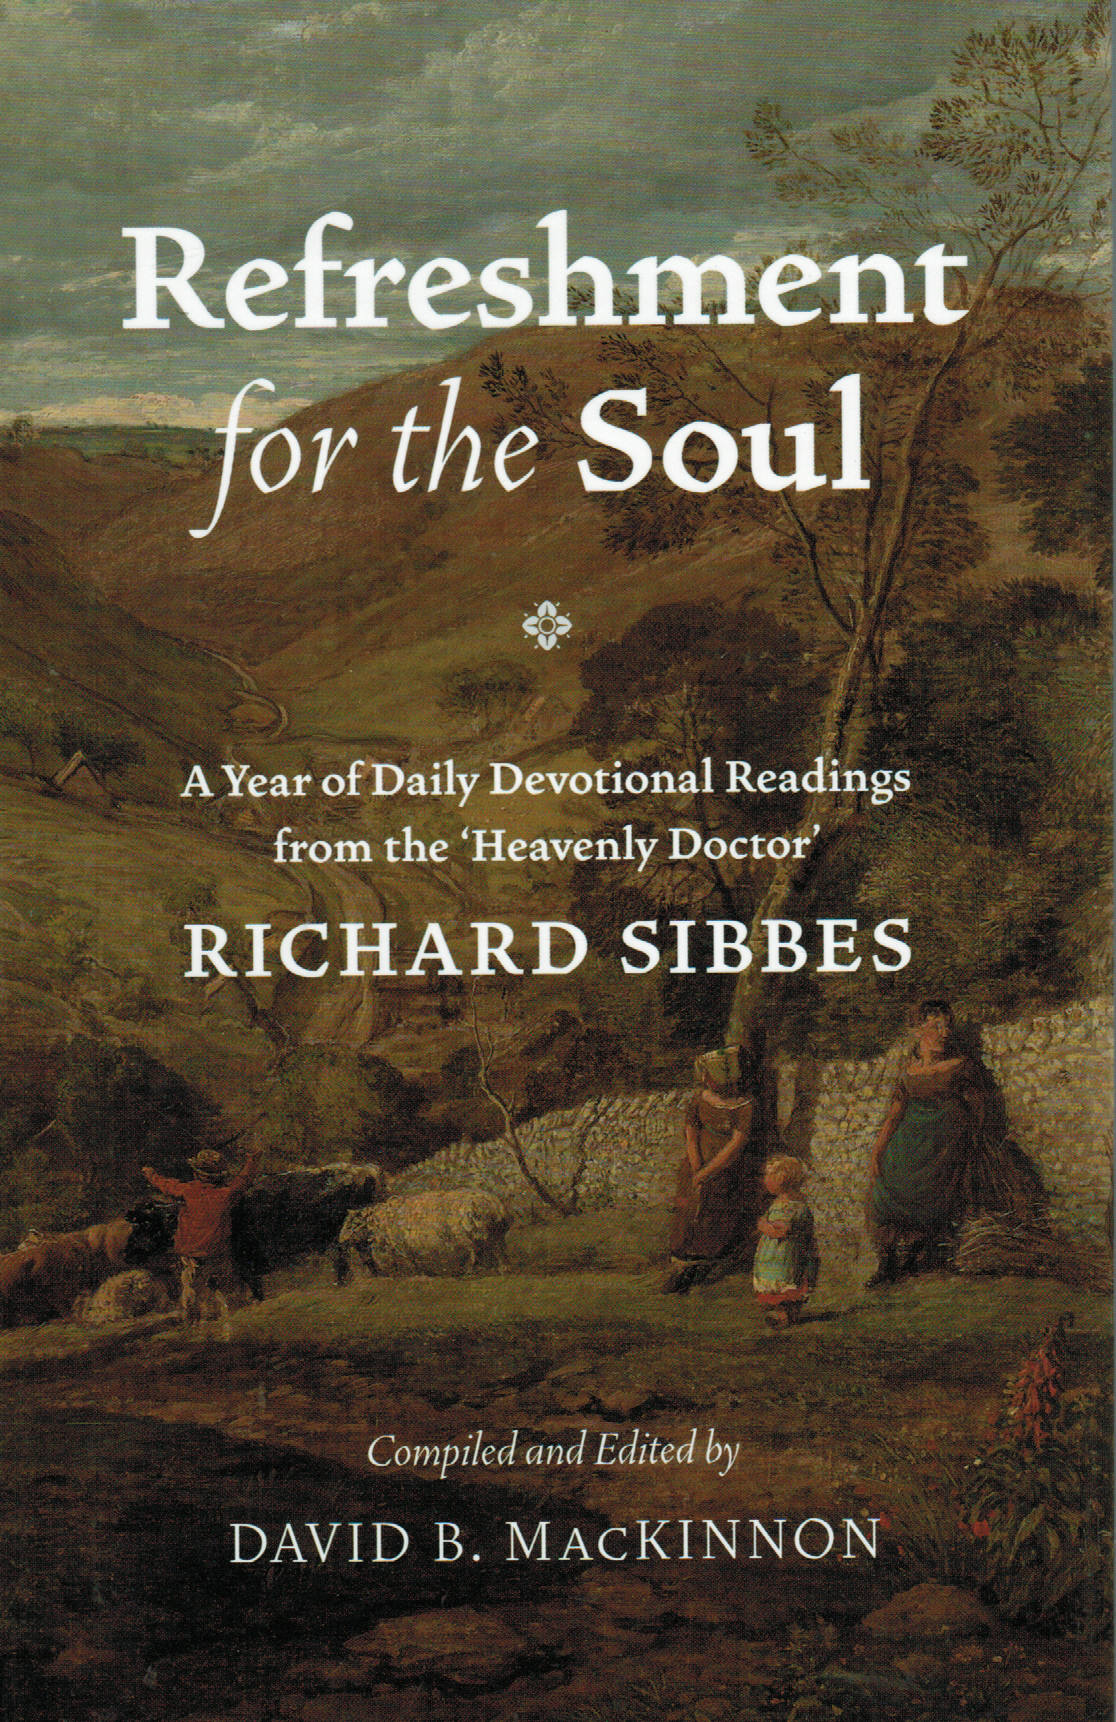 Refreshment for the Soul: A Year of Daily Readings from the 'Heavenly Doctor' Richard Sibbes